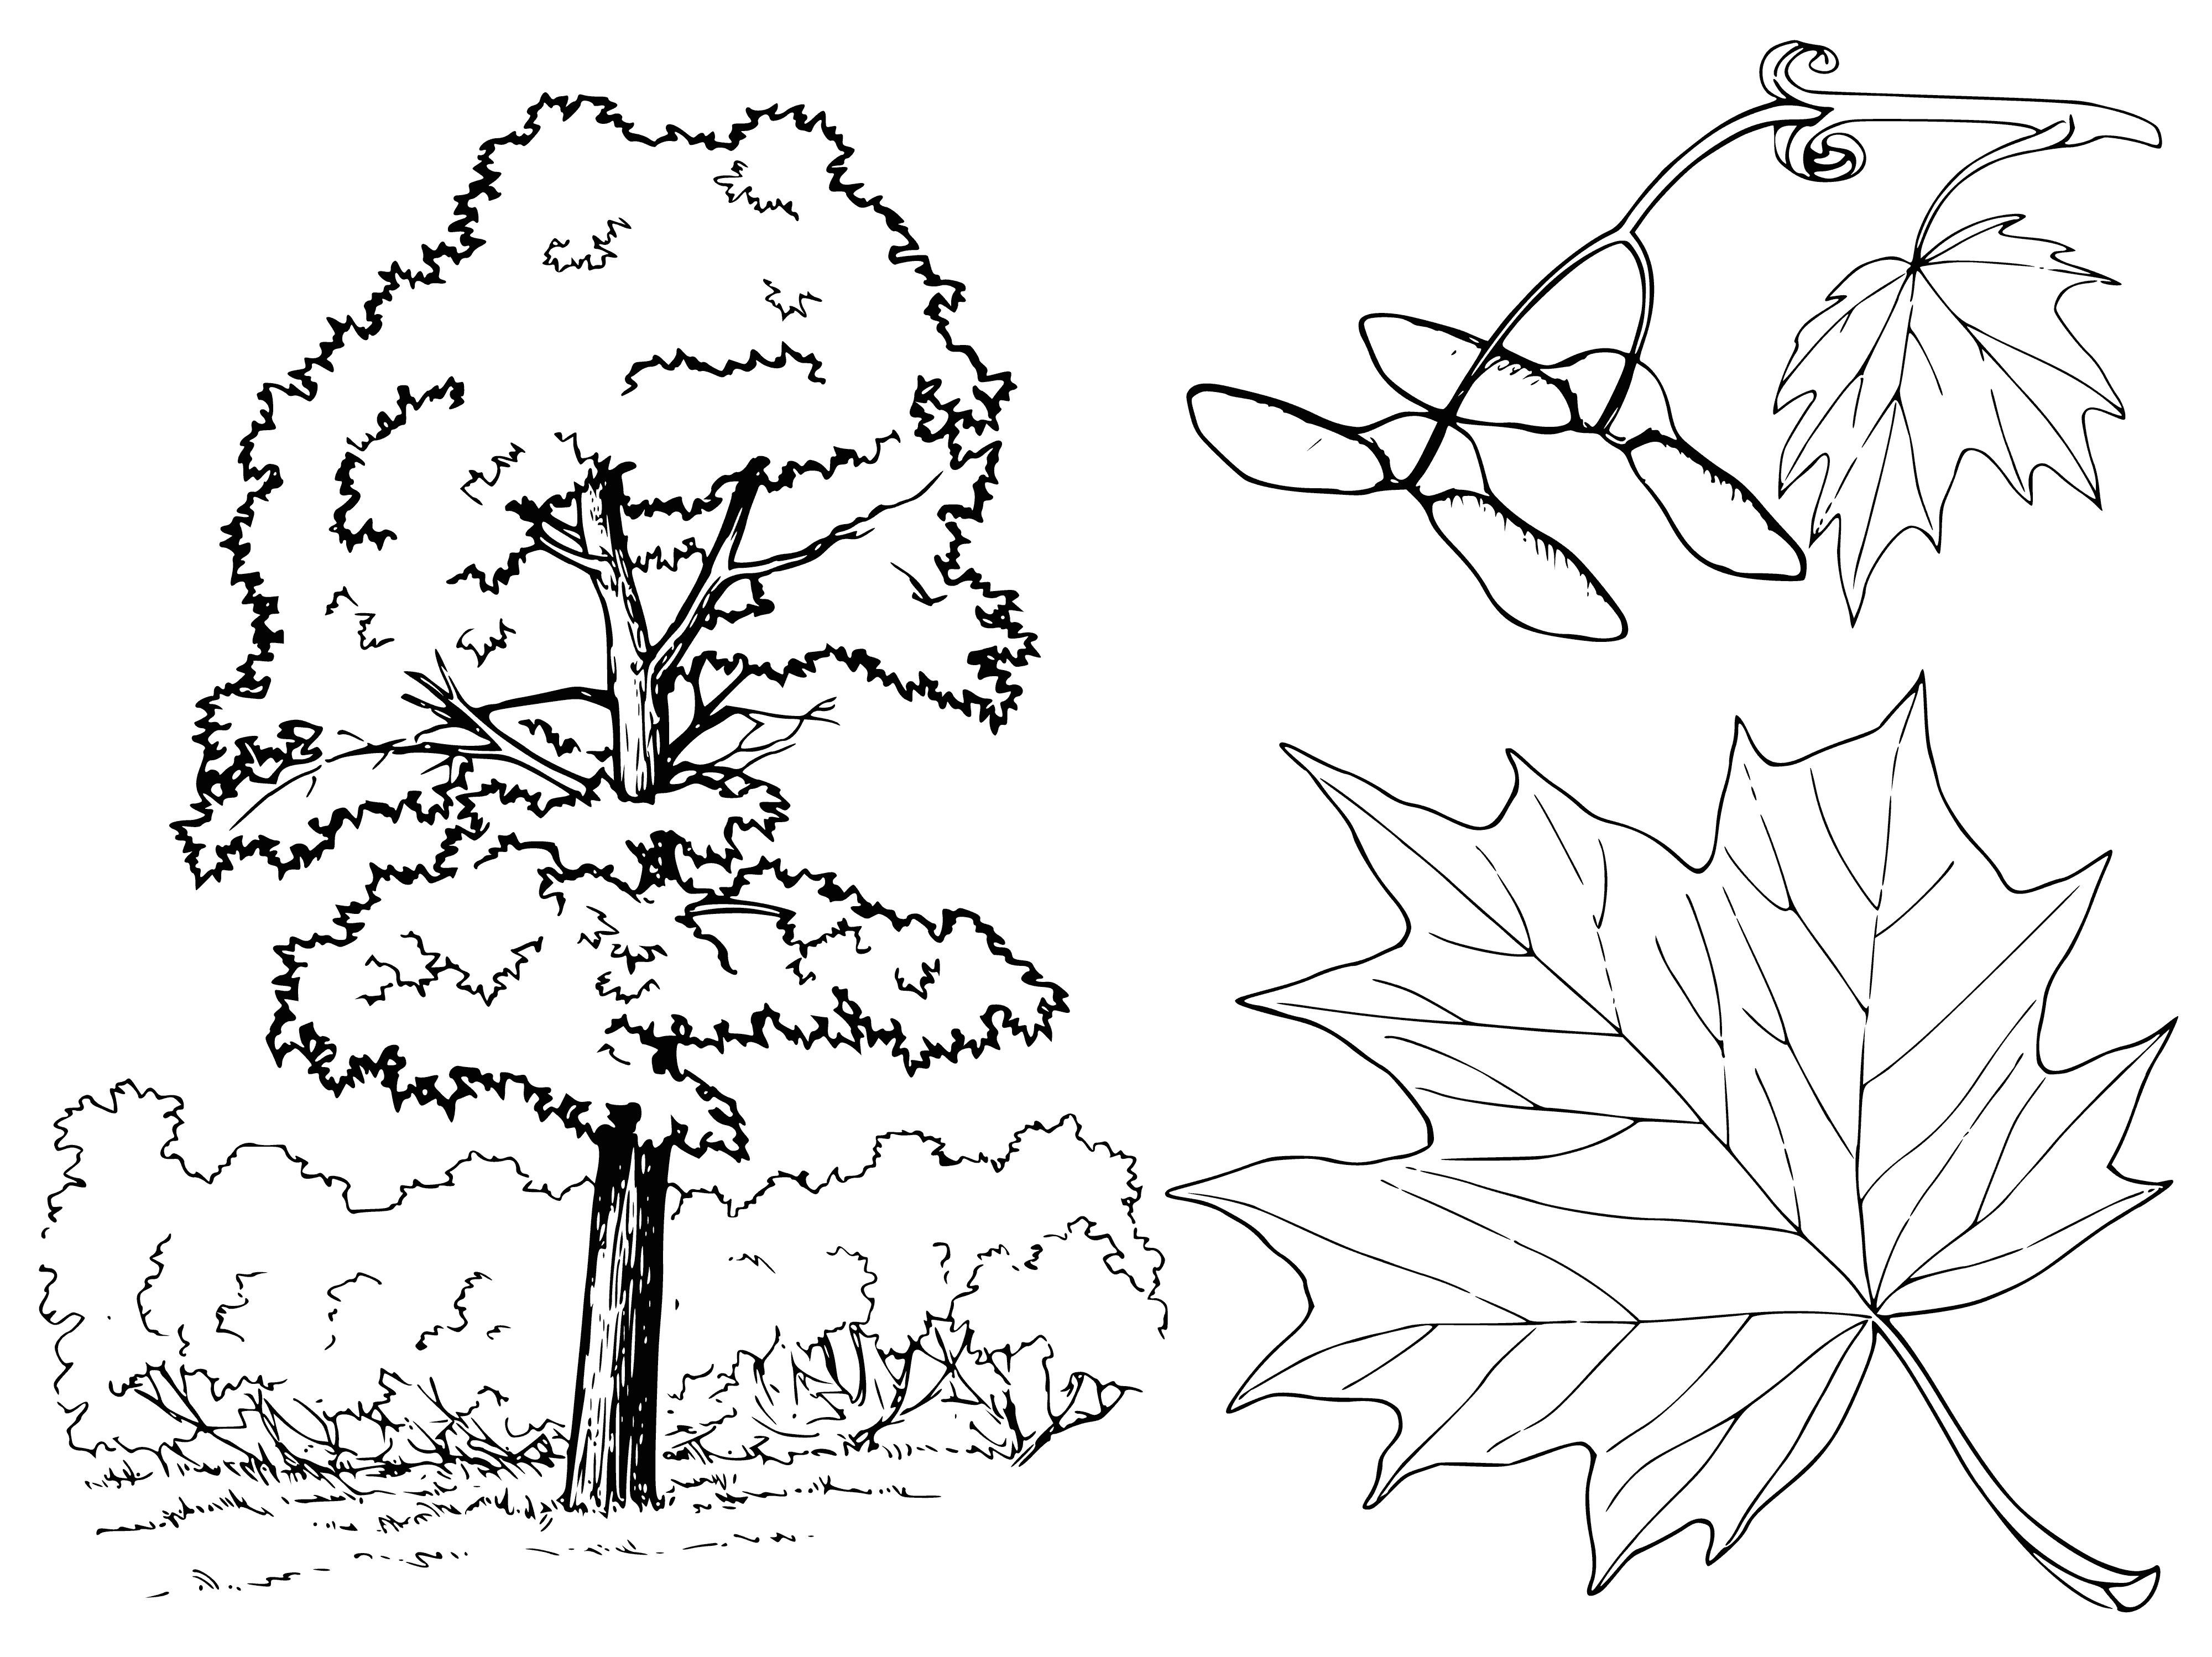 coloring page: Maple tree with red & yellow autumn leaves, strong trunk, branches spread out. Leaves pointy & tree stands tall.